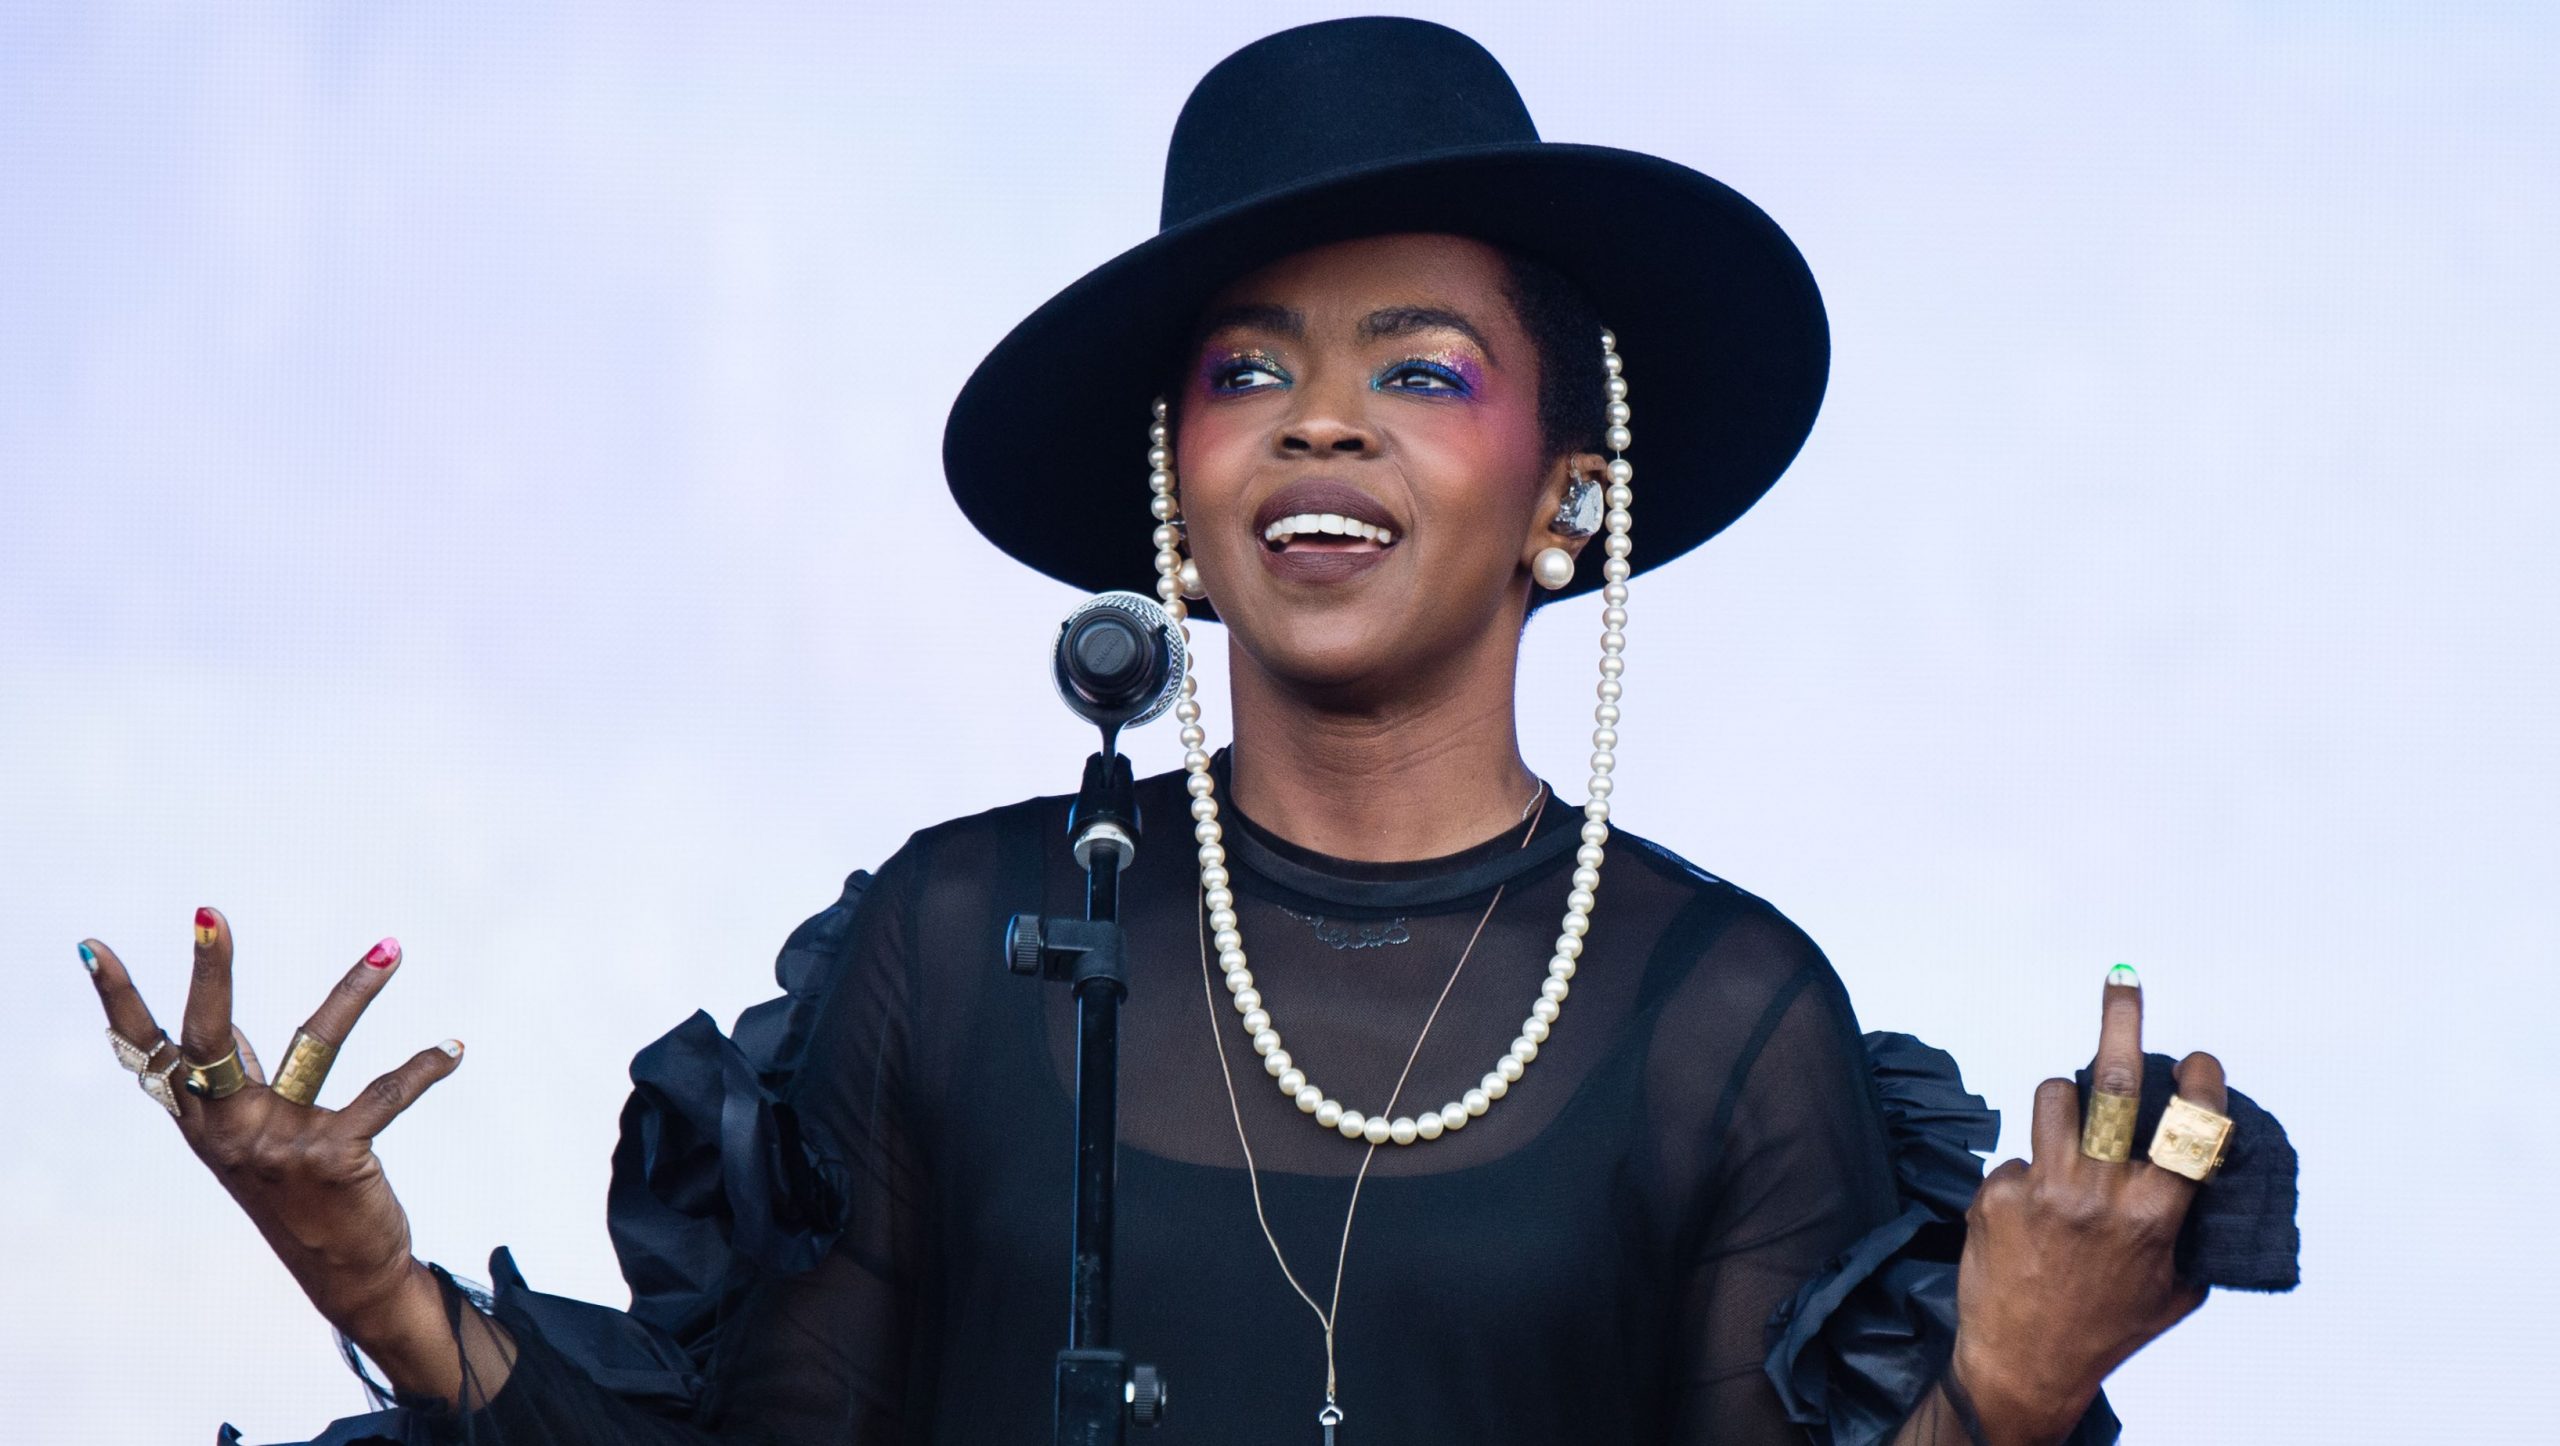 WATCH: Lauryn Hill responds to her tour tardiness; tells fans “Y’all lucky I make it”